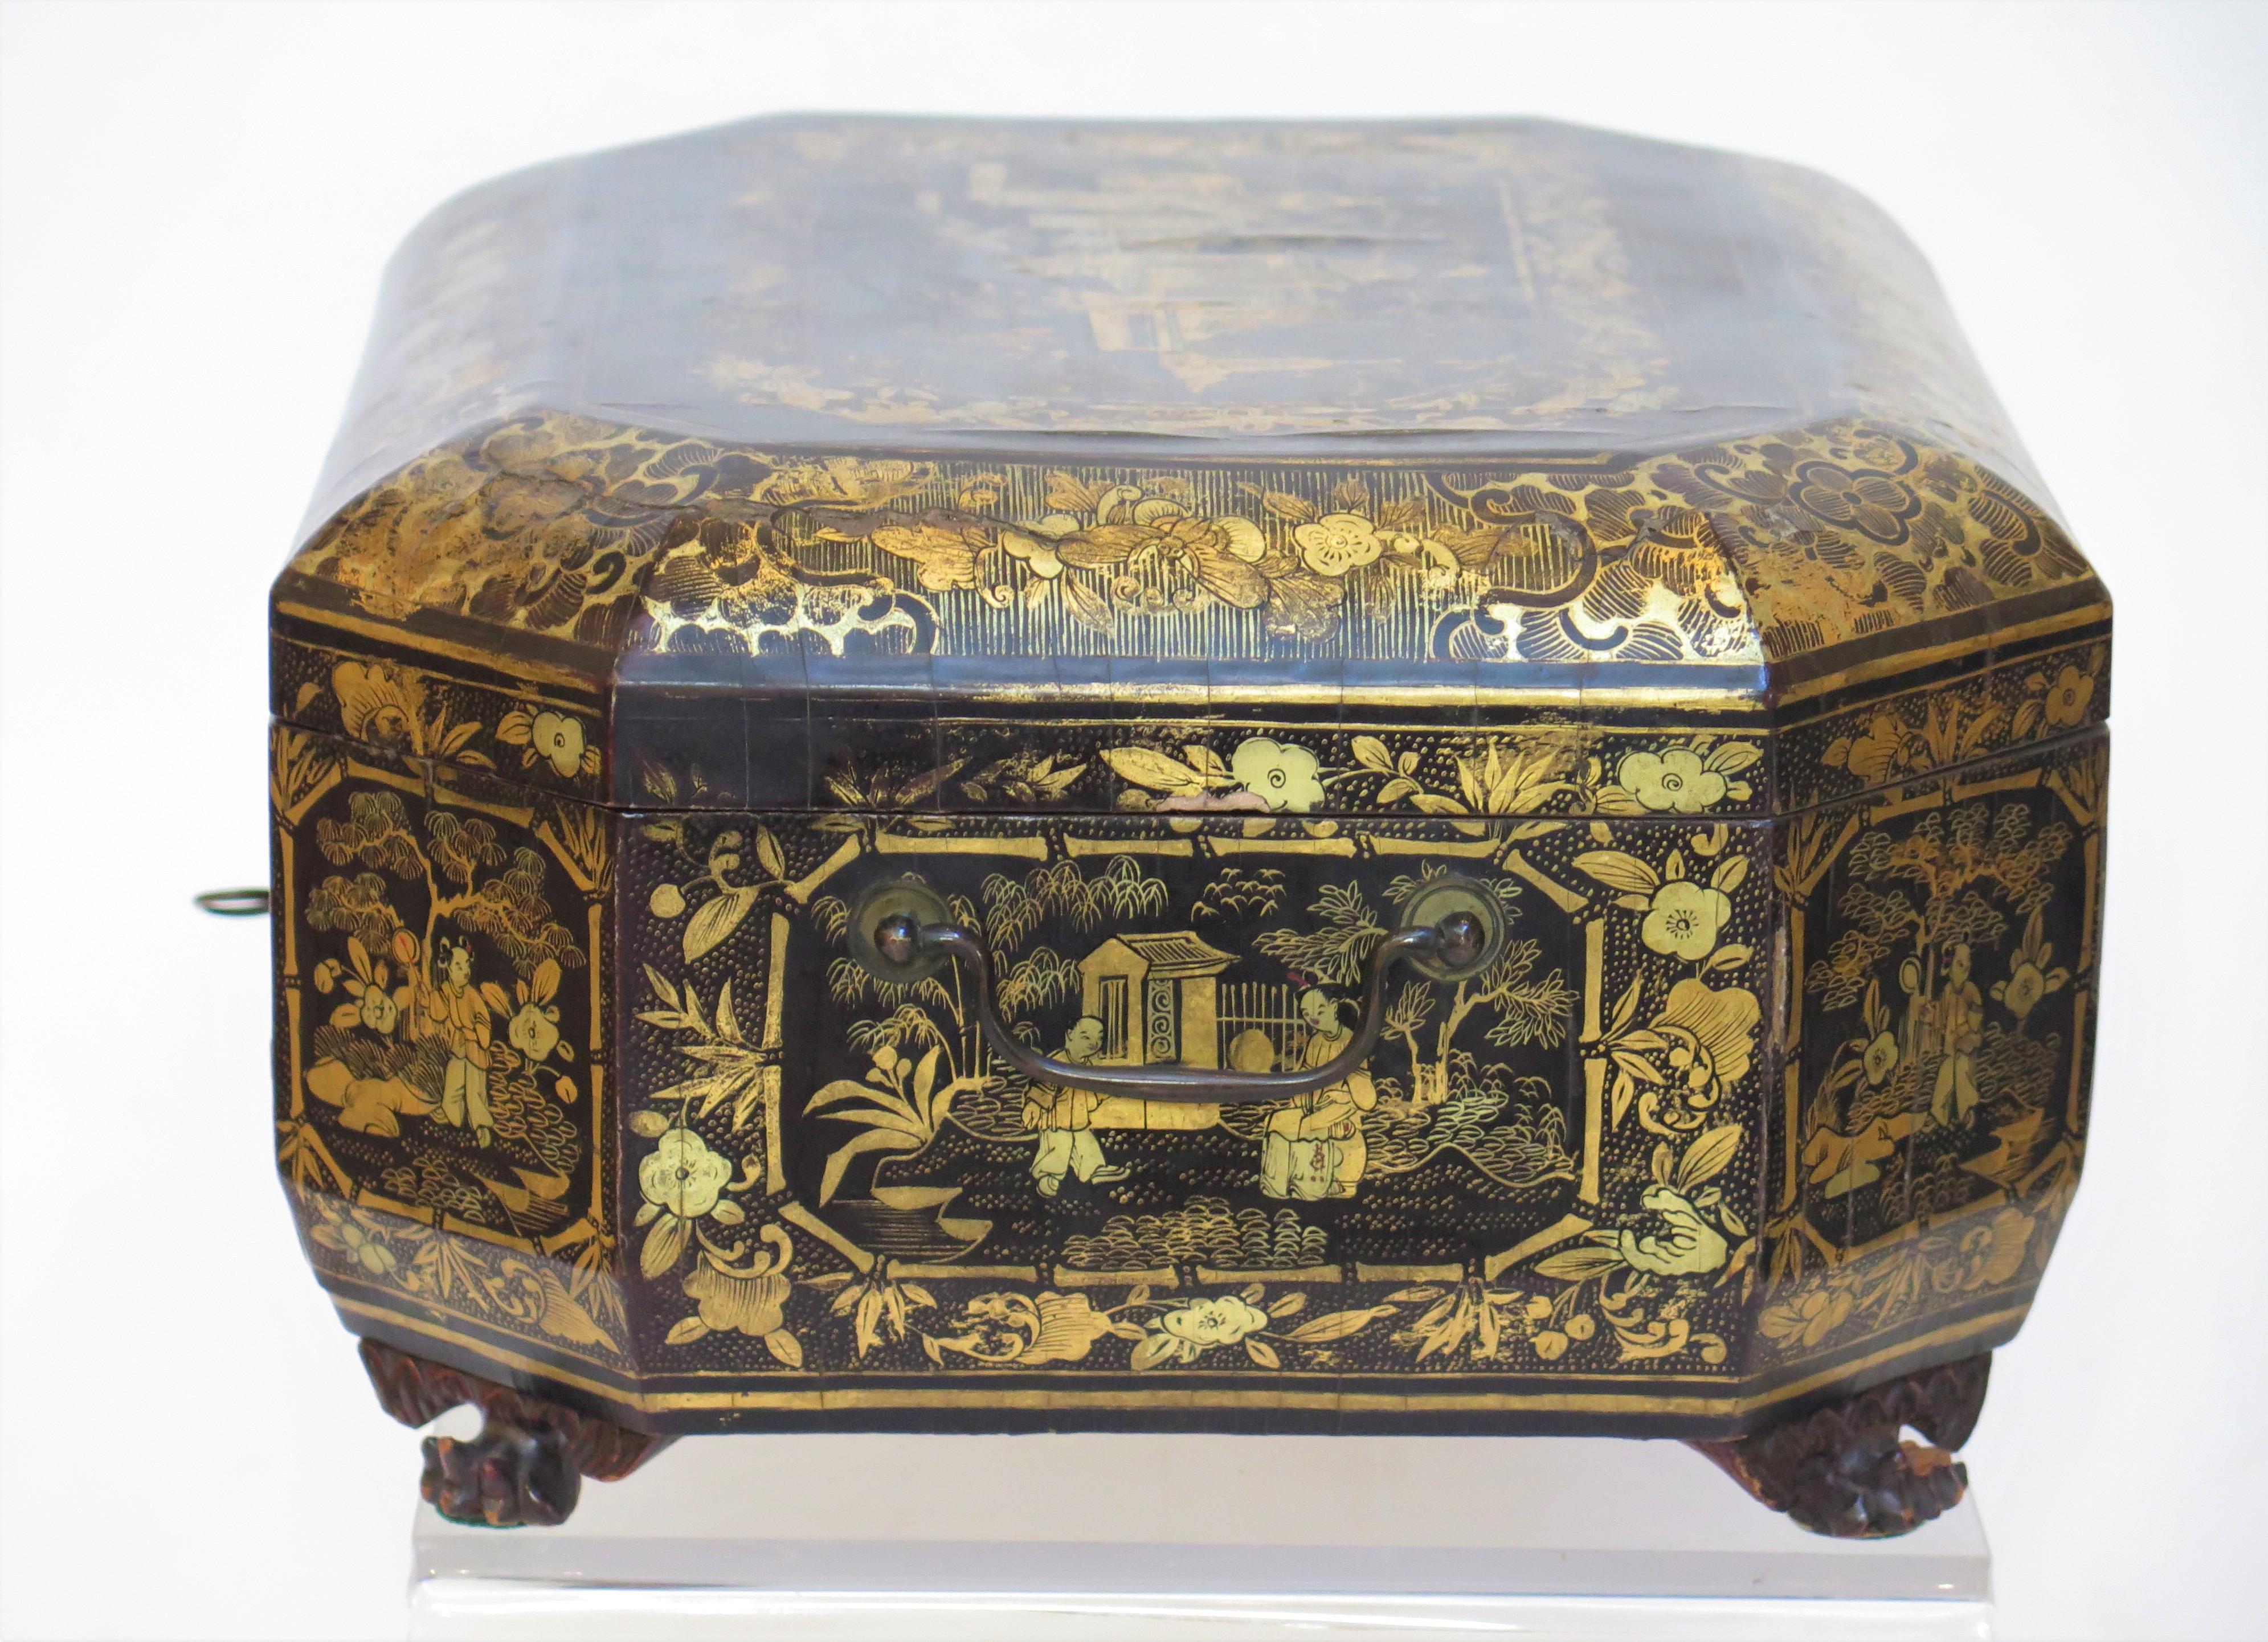 Ealy 19th Century Chinese Export Lacquer Sewing Box In Good Condition For Sale In Dallas, TX